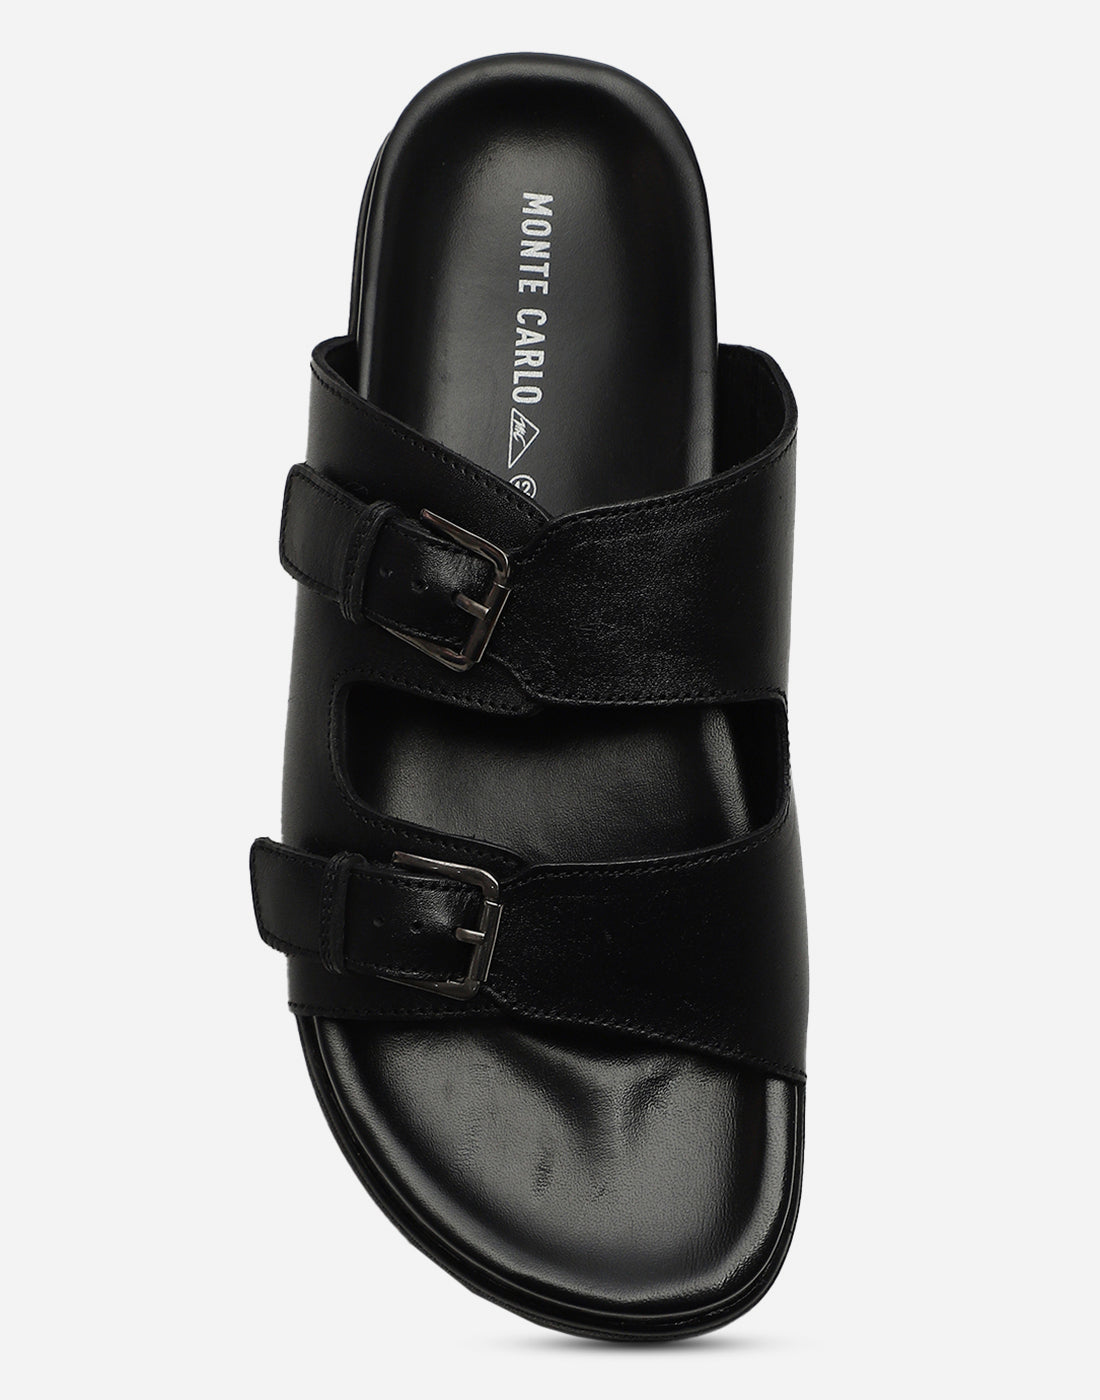 Men Black Leather Comfort Casual Slippers